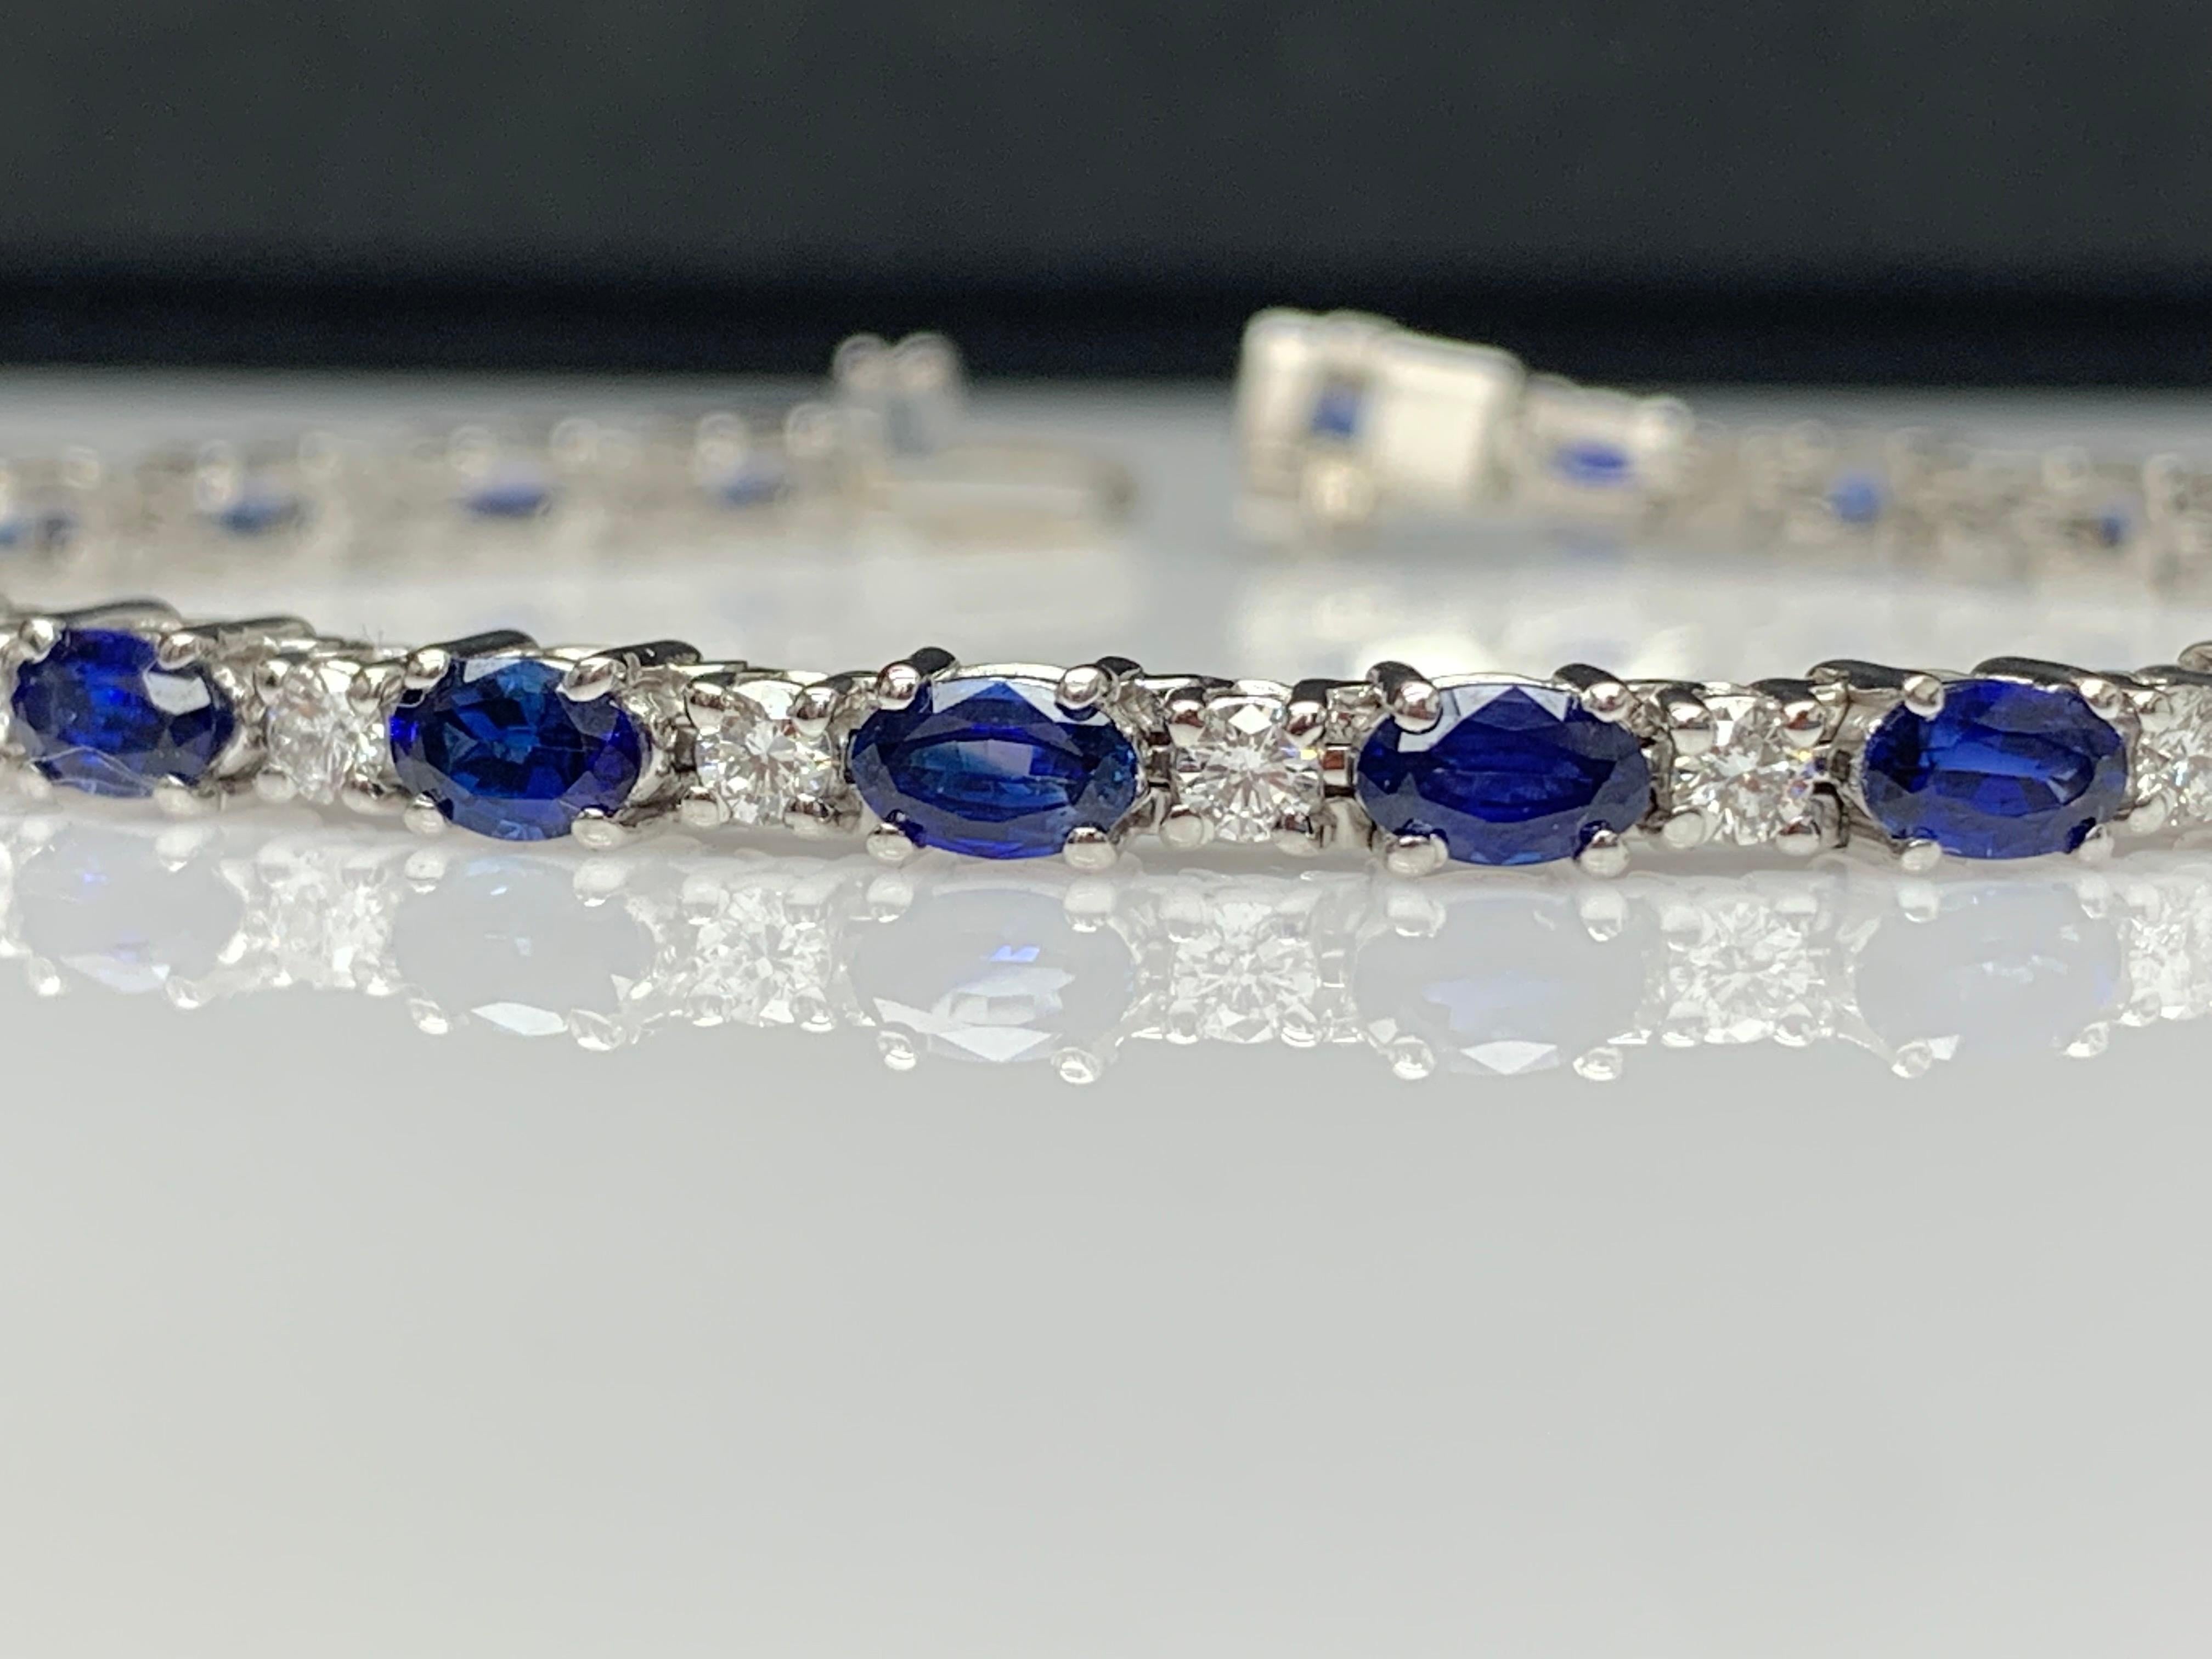 Showcasing 6.01 carats total of 23 oval cut blue sapphires, elegantly alternating with 1.15 carats of 23 round brilliant diamonds. Made in 14 karat white gold.

Style available in different price ranges. Prices are based on your selection of the